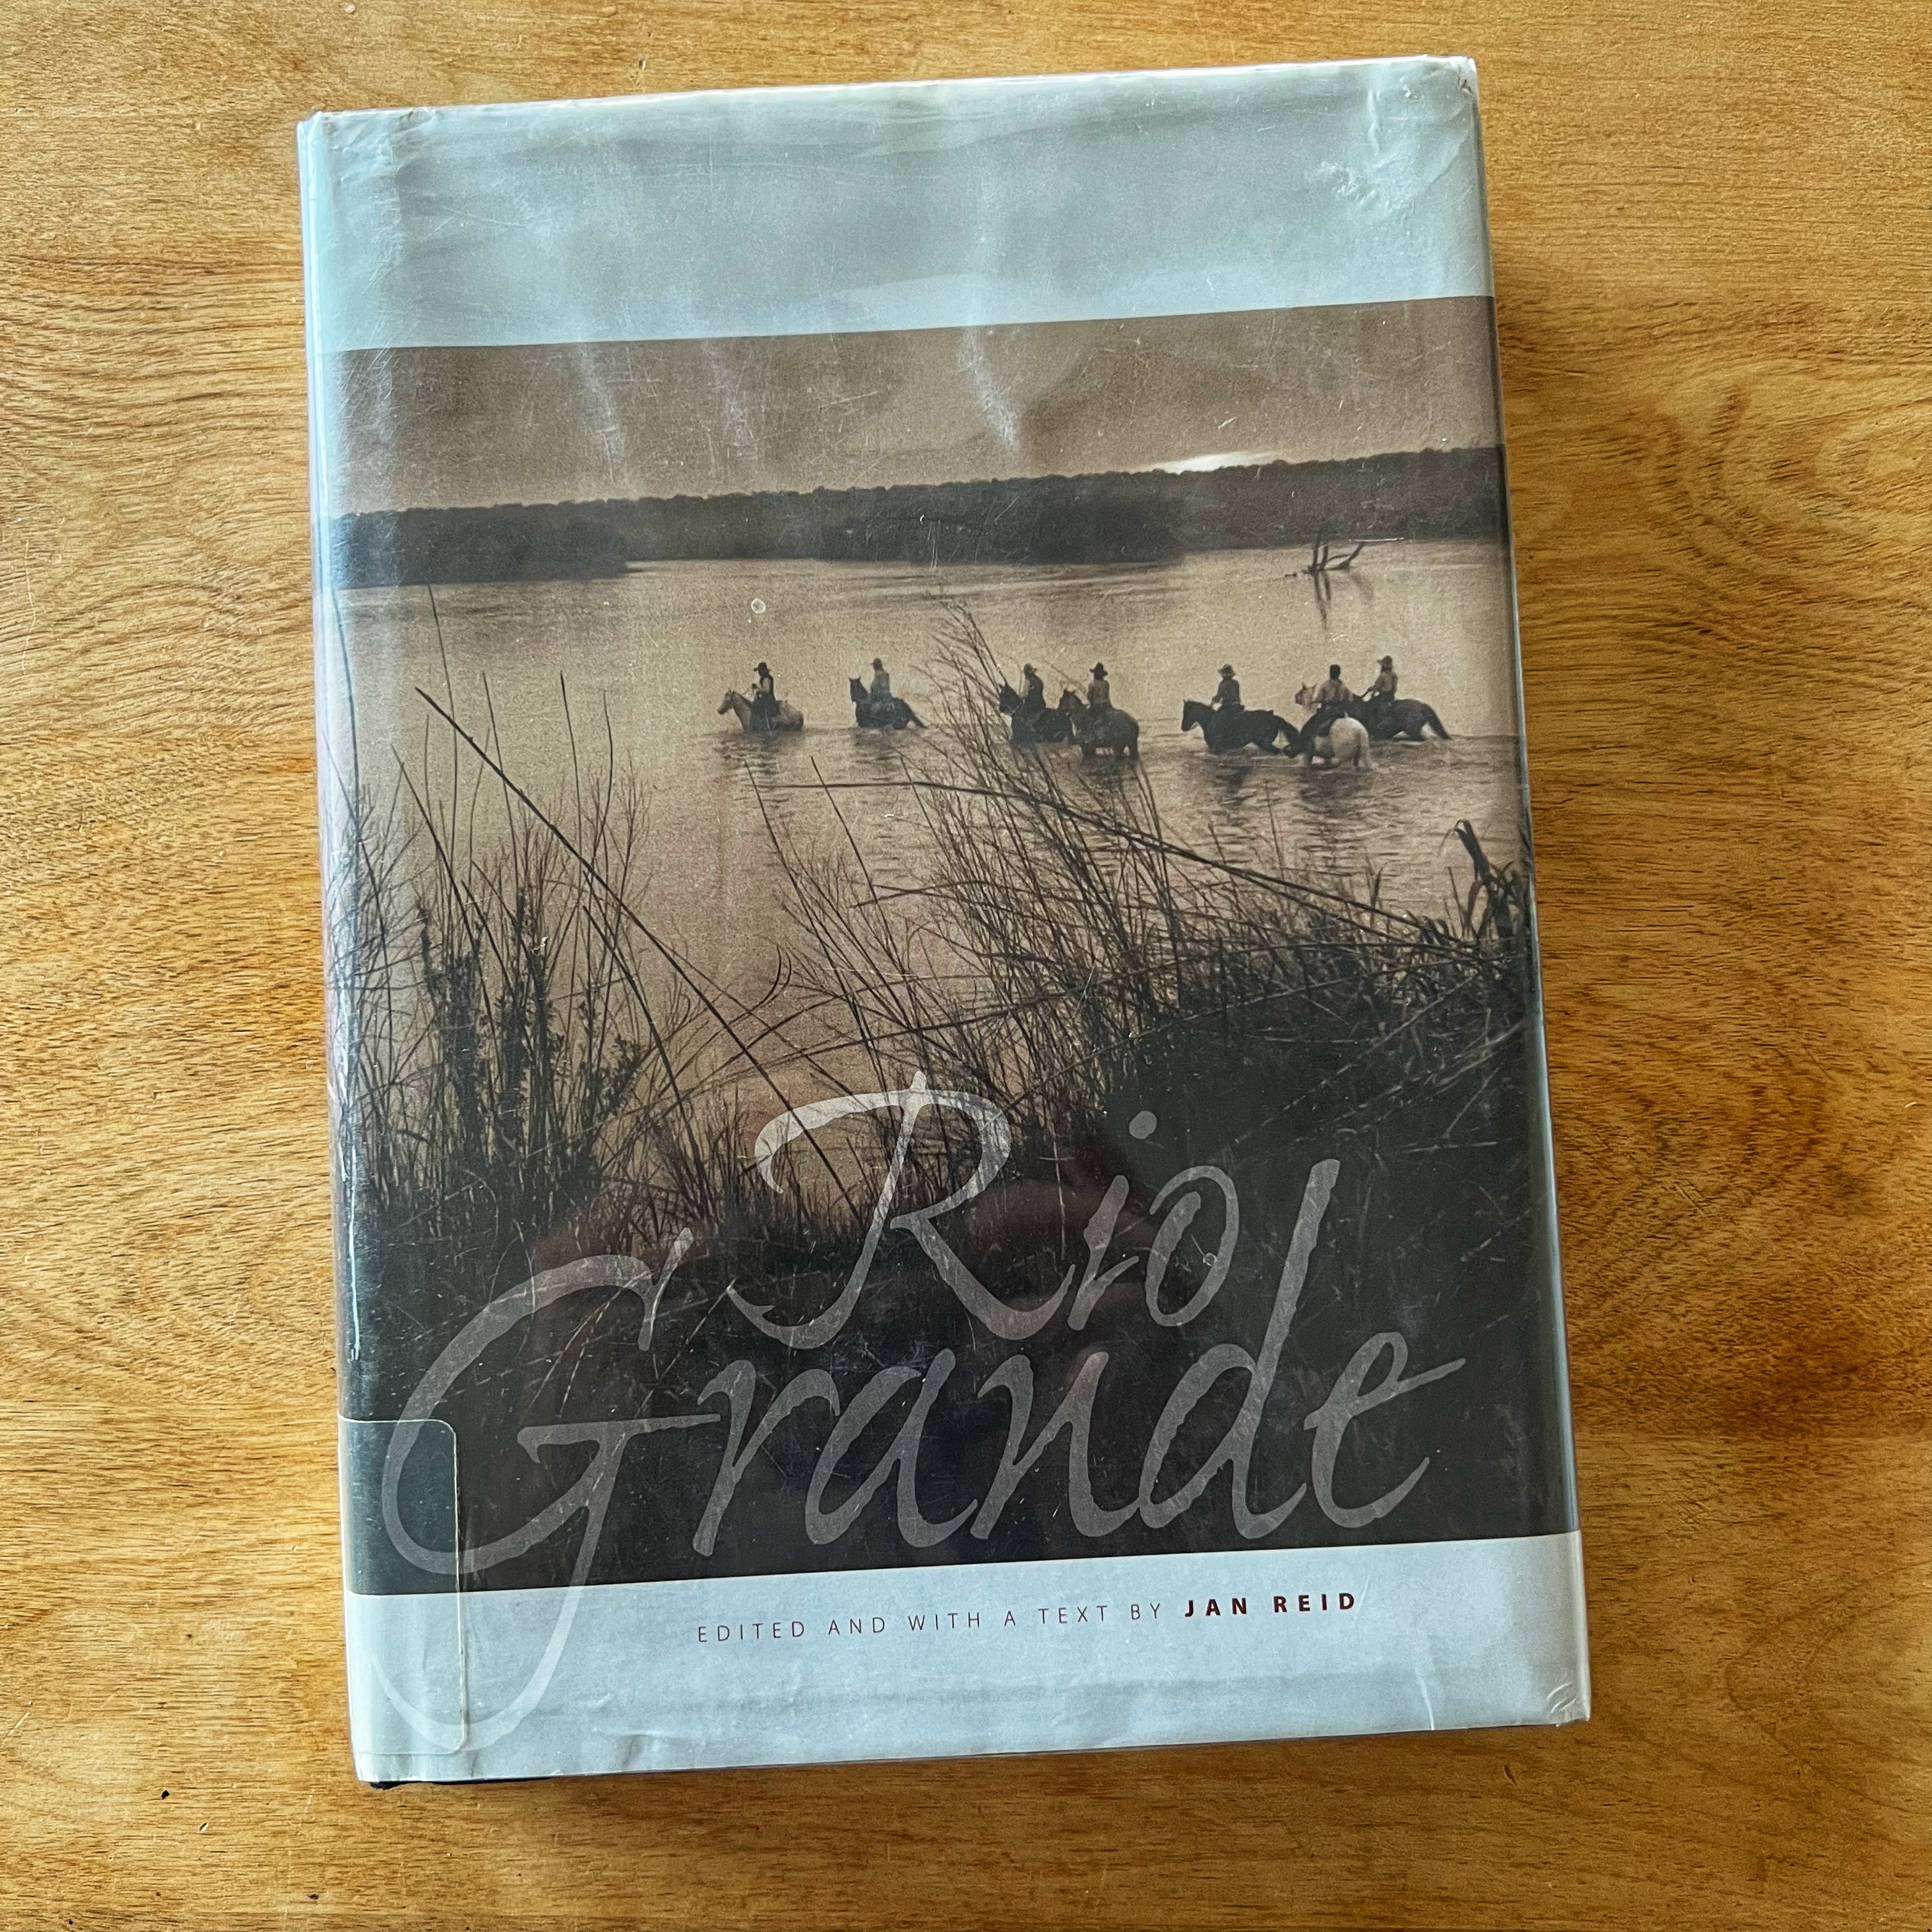 Jan Reid's Rio Grande is a beautiful book loaded with excerpts, essays and photographs from a wide variety of authors and photographers.